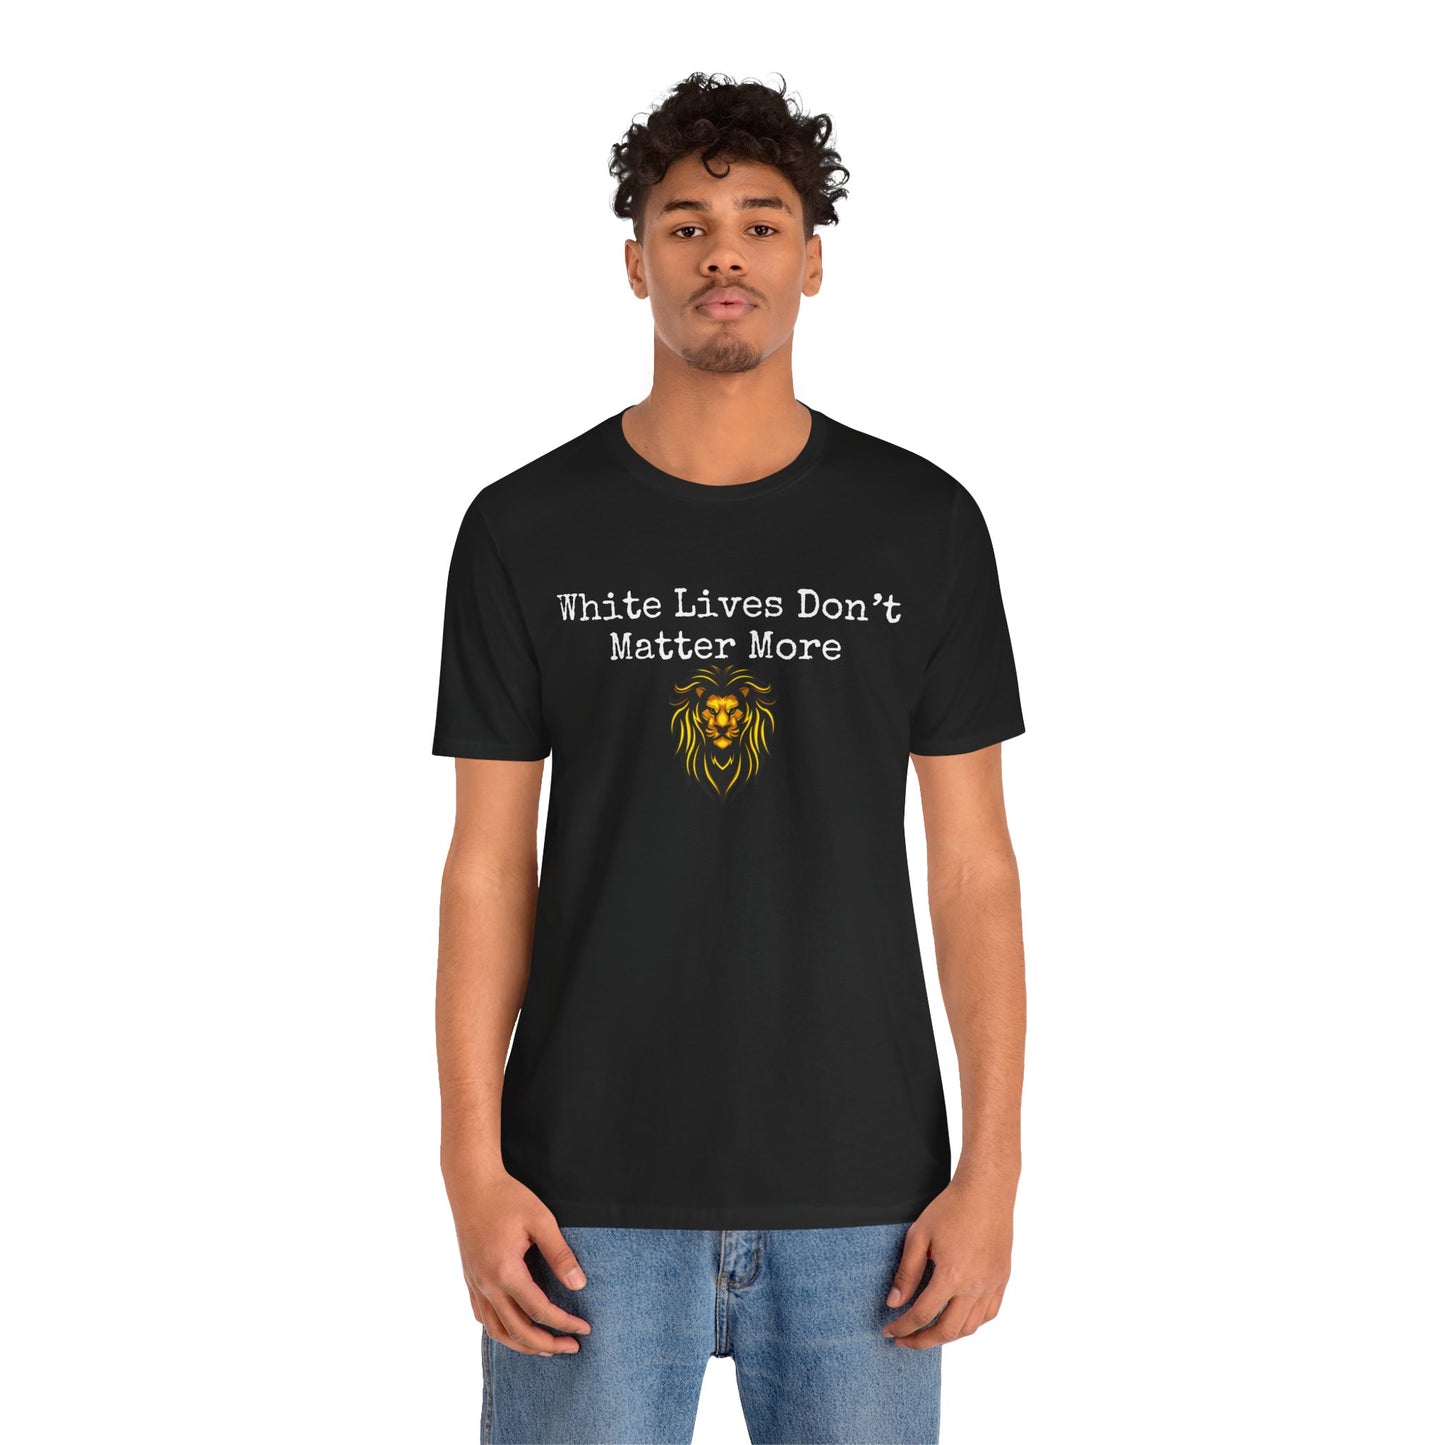 "White Lives Don't Matter More" Short Sleeve T-Shirt ('Typed' Text with Graphic)